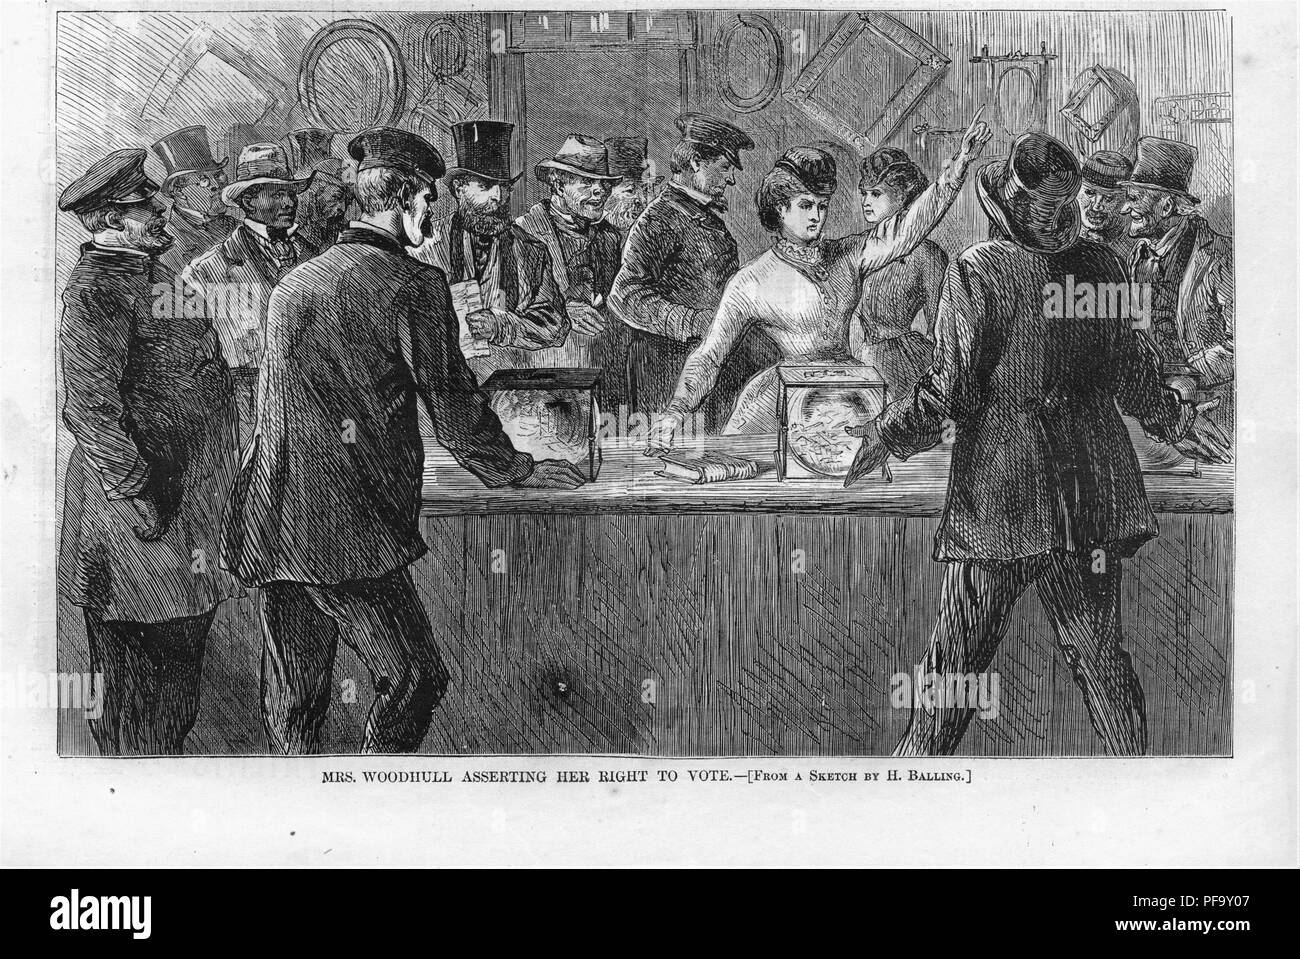 Black and white print illustrating Victoria Woodhull, the first woman candidate for President, with her arm raised, after breaking into a polling station and demanding to be allowed to vote, titled 'Mrs Woodhull Asserting her Right to Vote, ' illustrated by H Balling for the American market, 1871. () Stock Photo